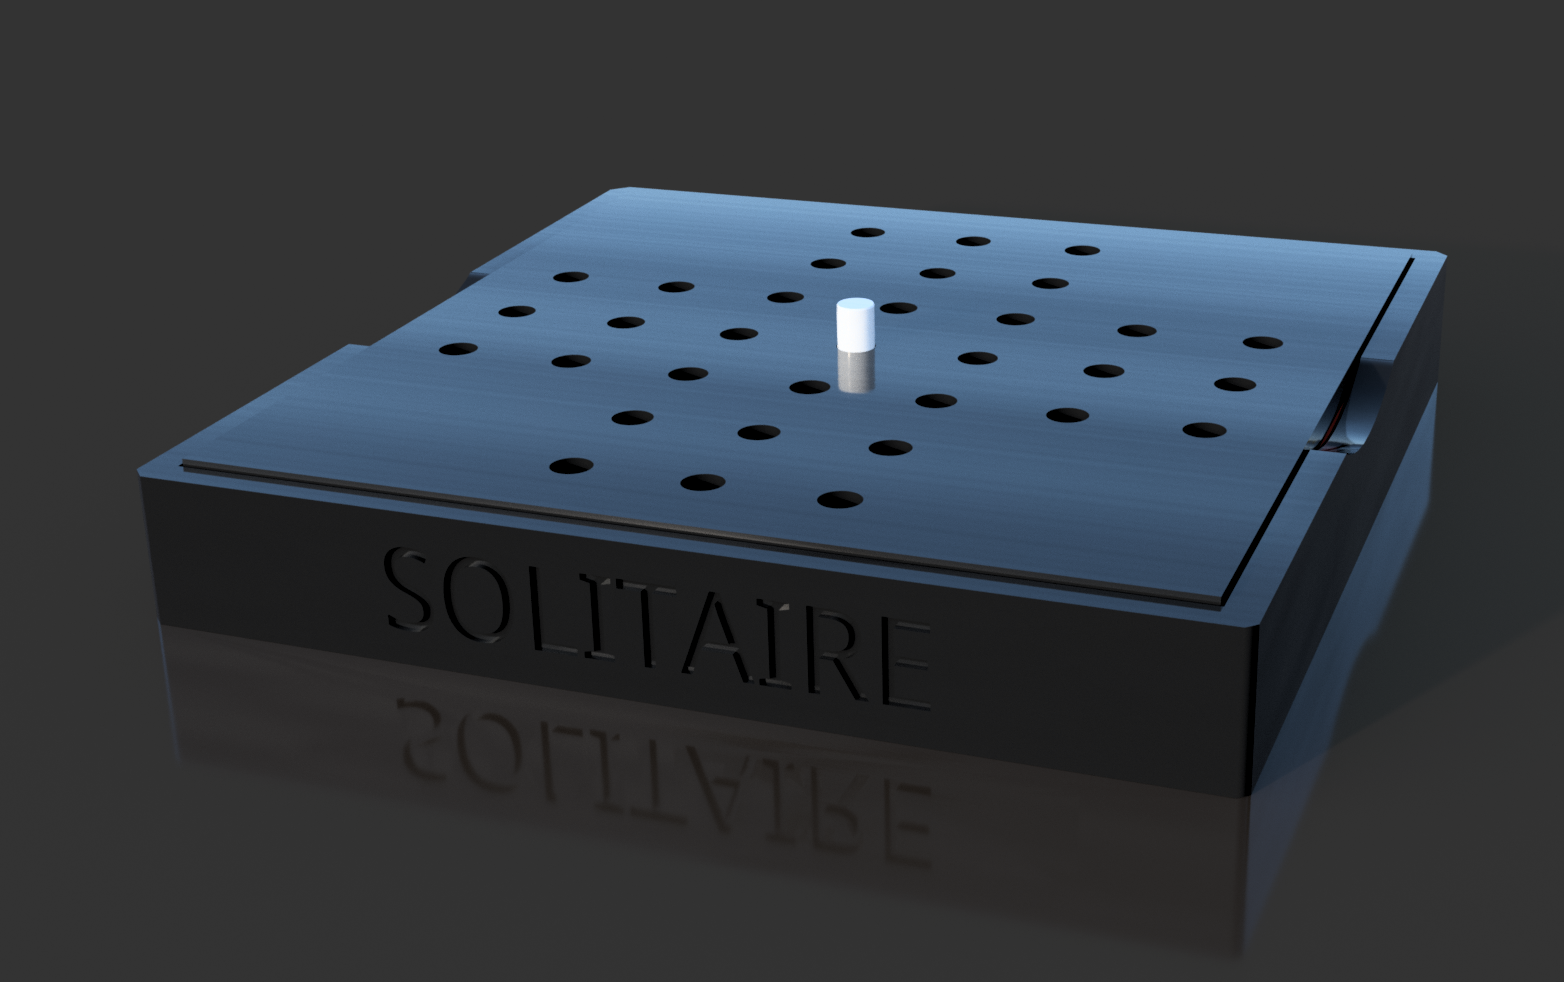 Solitaire end_01.png